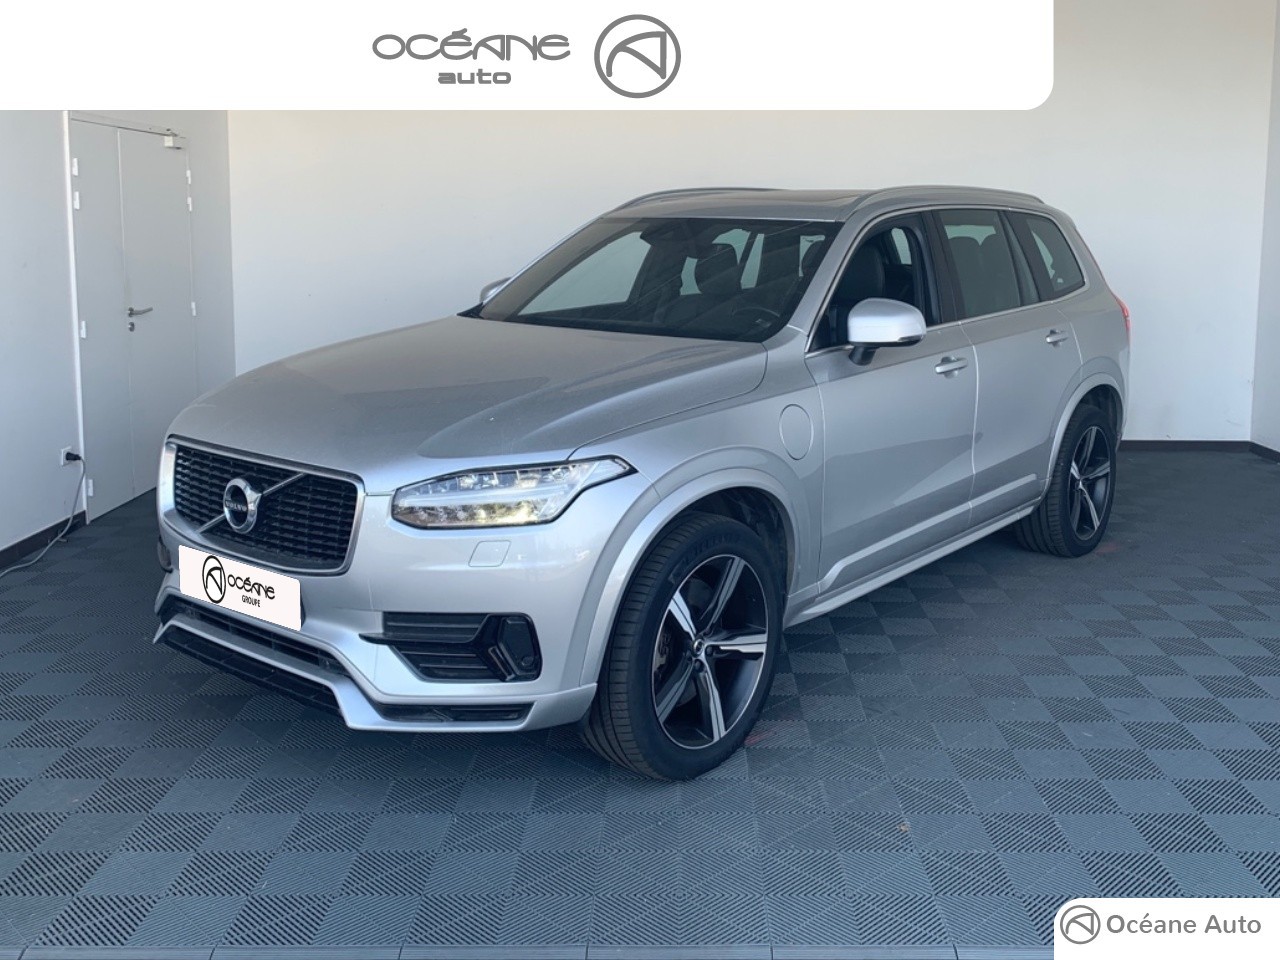 VOLVO XC90 XC90 T8 Twin Engine 303+87 ch Geartronic 7pl - Véhicule Occasion Océane Auto